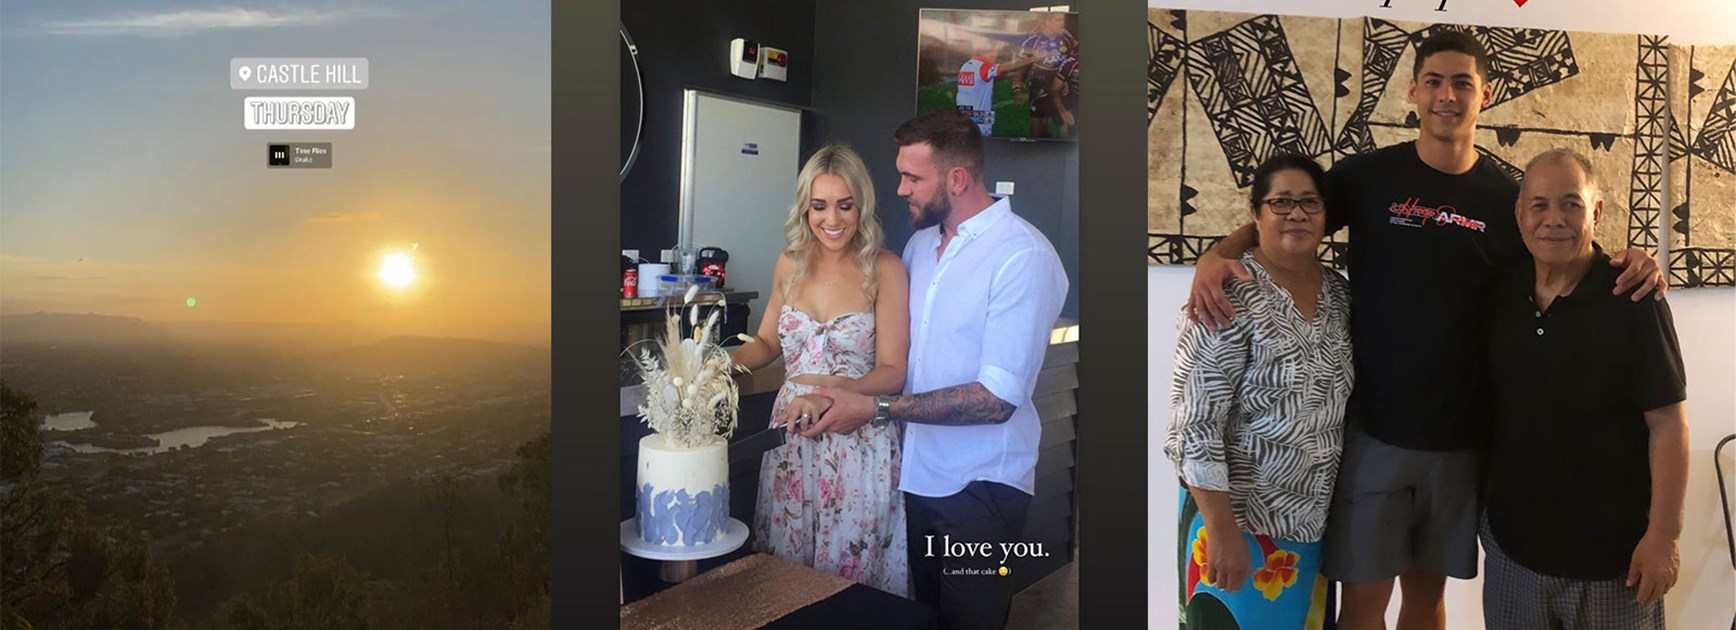 Cowboys on social: Engagement party, family & Origin